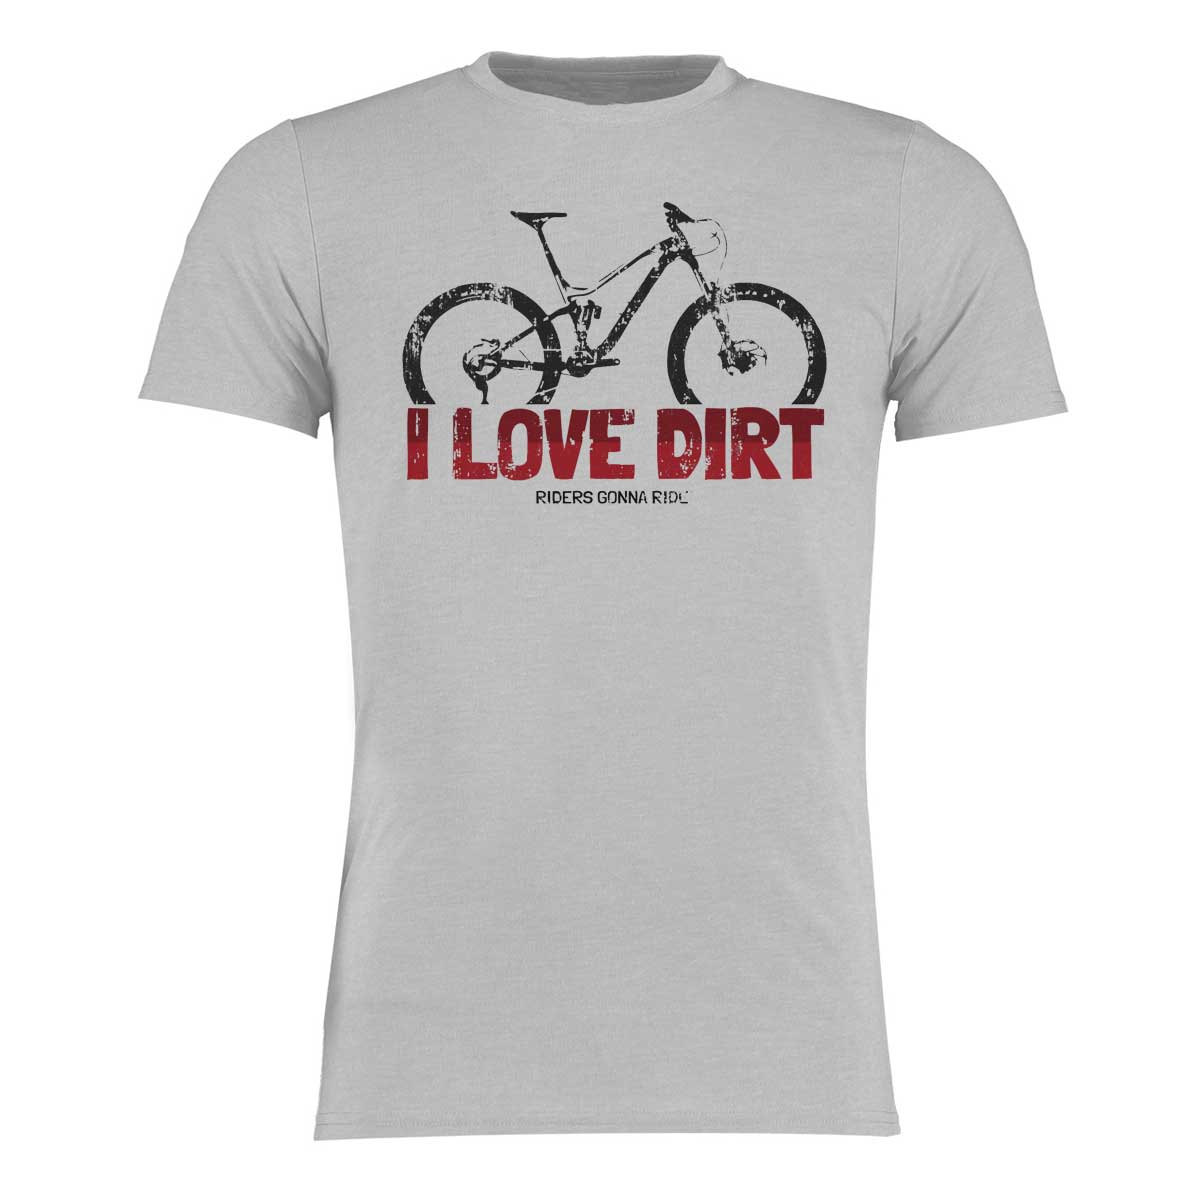 RIDERS GONNA RIDE® T-Shirt LOVE DIRT - RIDERS GONNA RIDE®